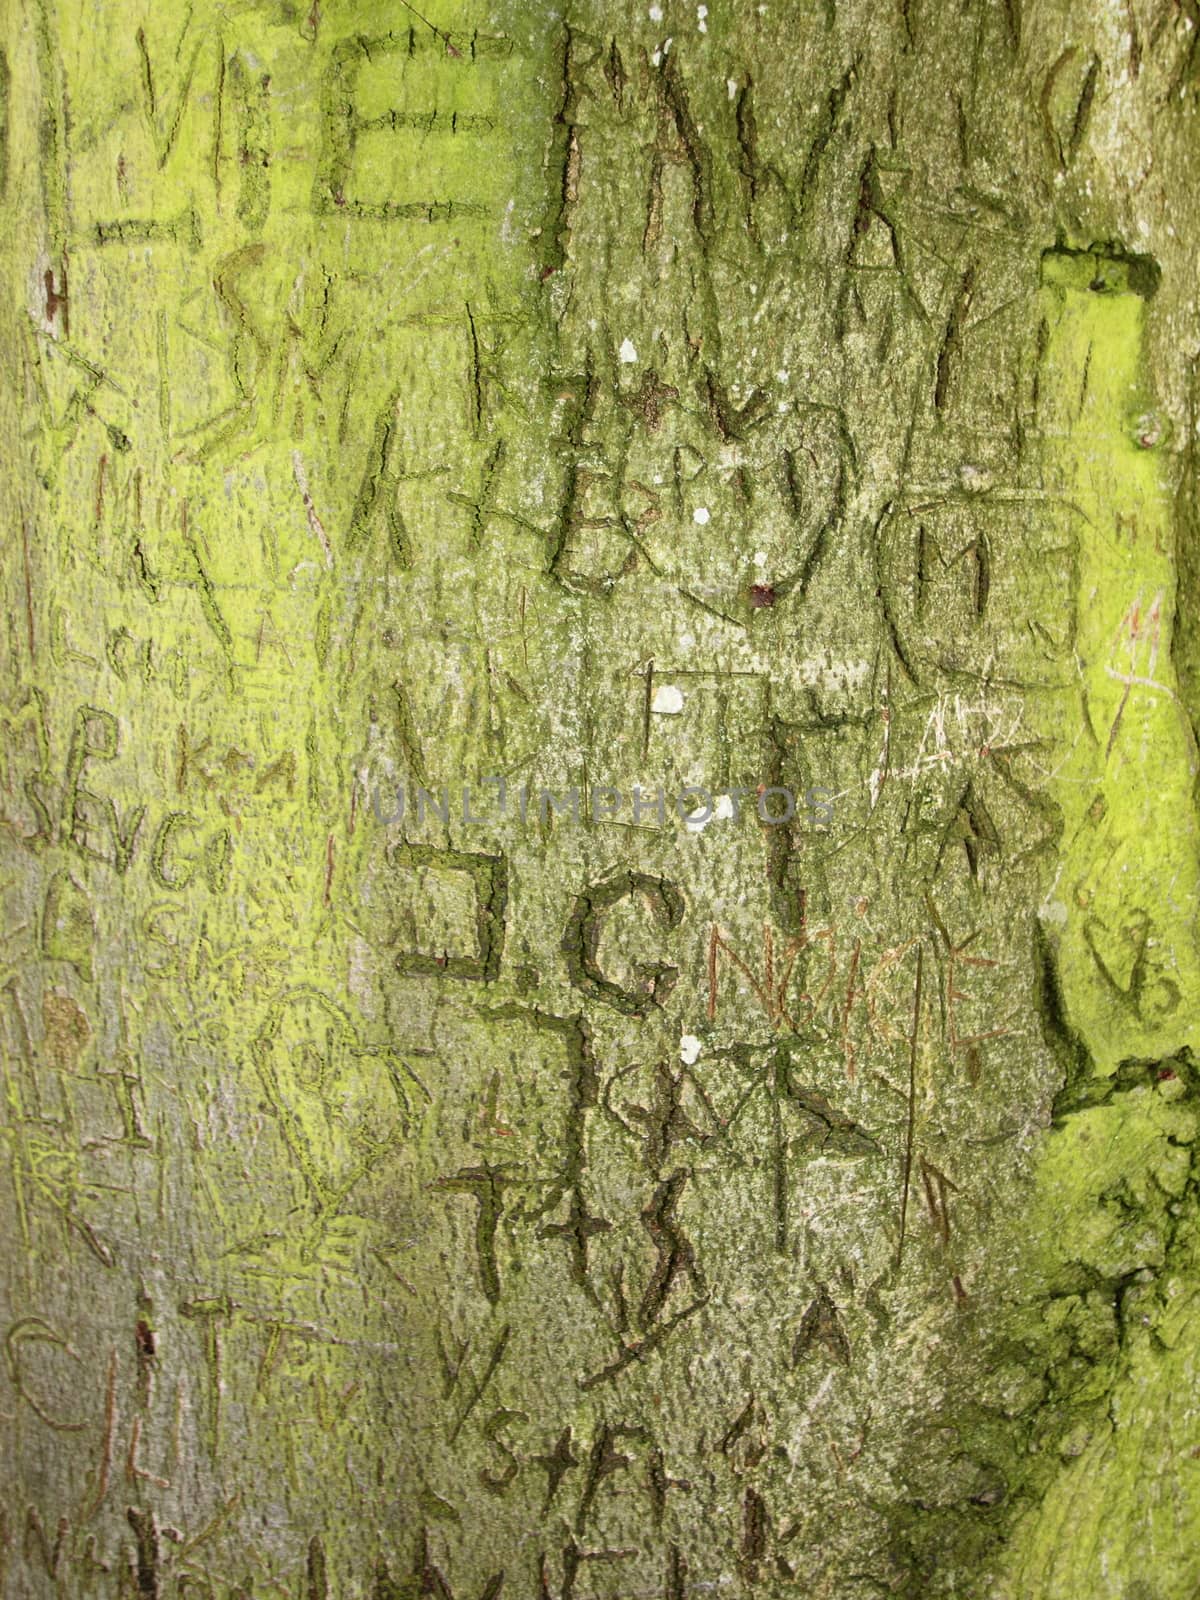 Initials Memory Carving in Green Bark on Old Tree by HoleInTheBox